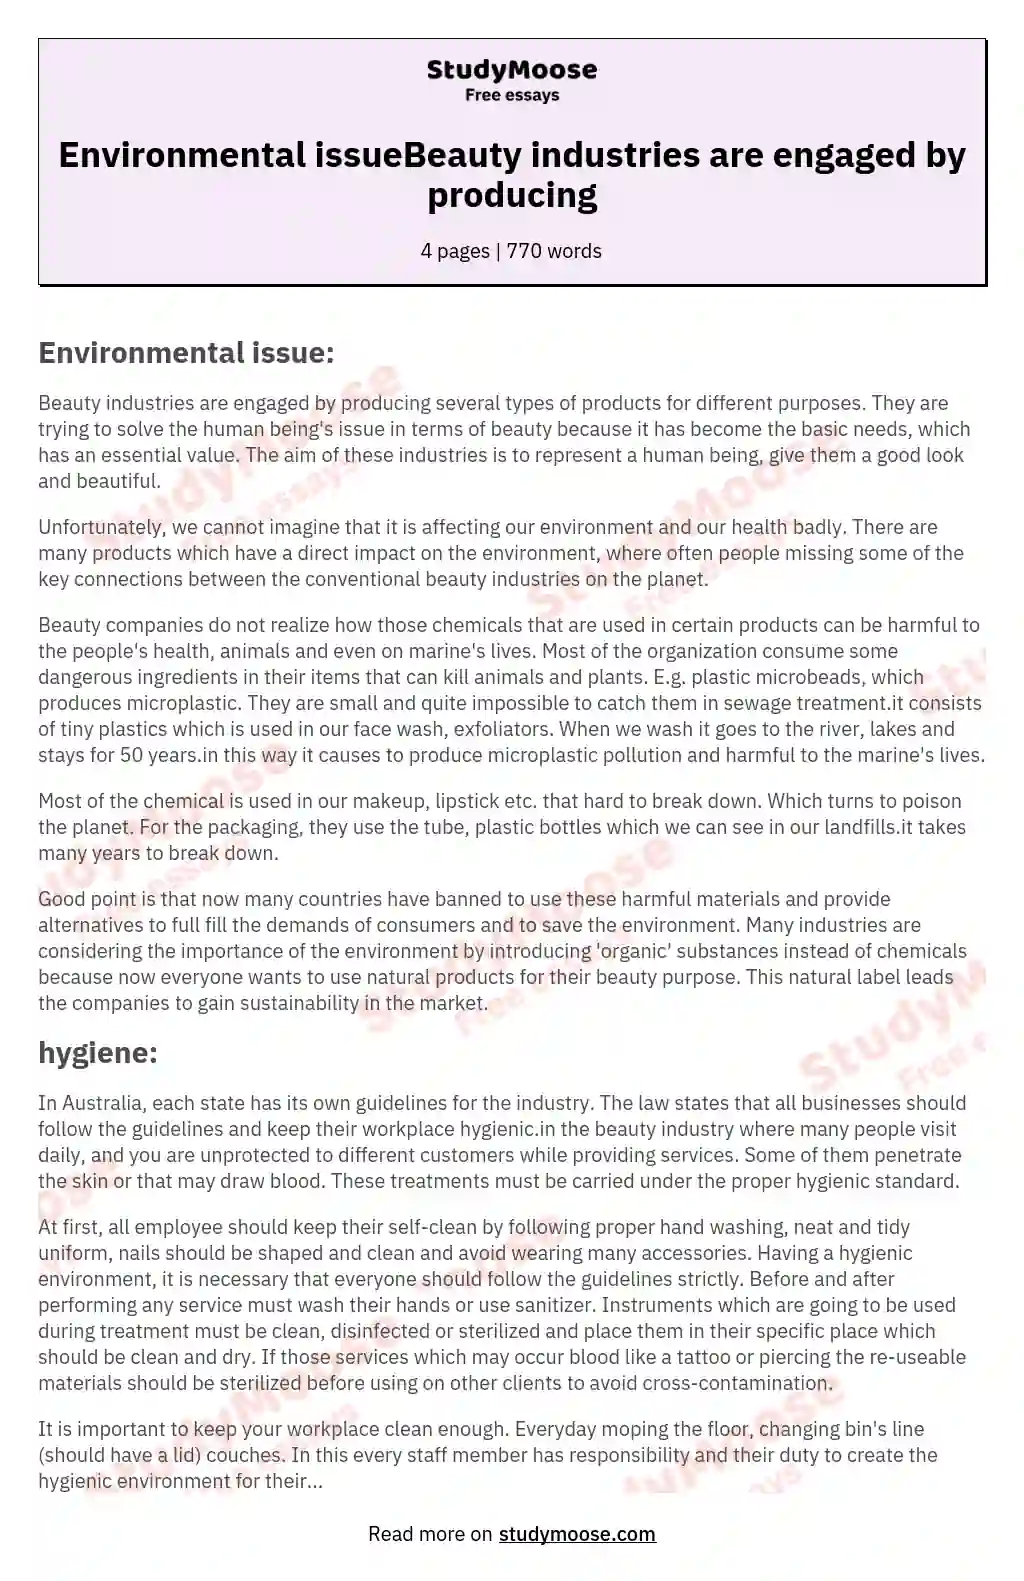 Environmental issueBeauty industries are engaged by producing essay